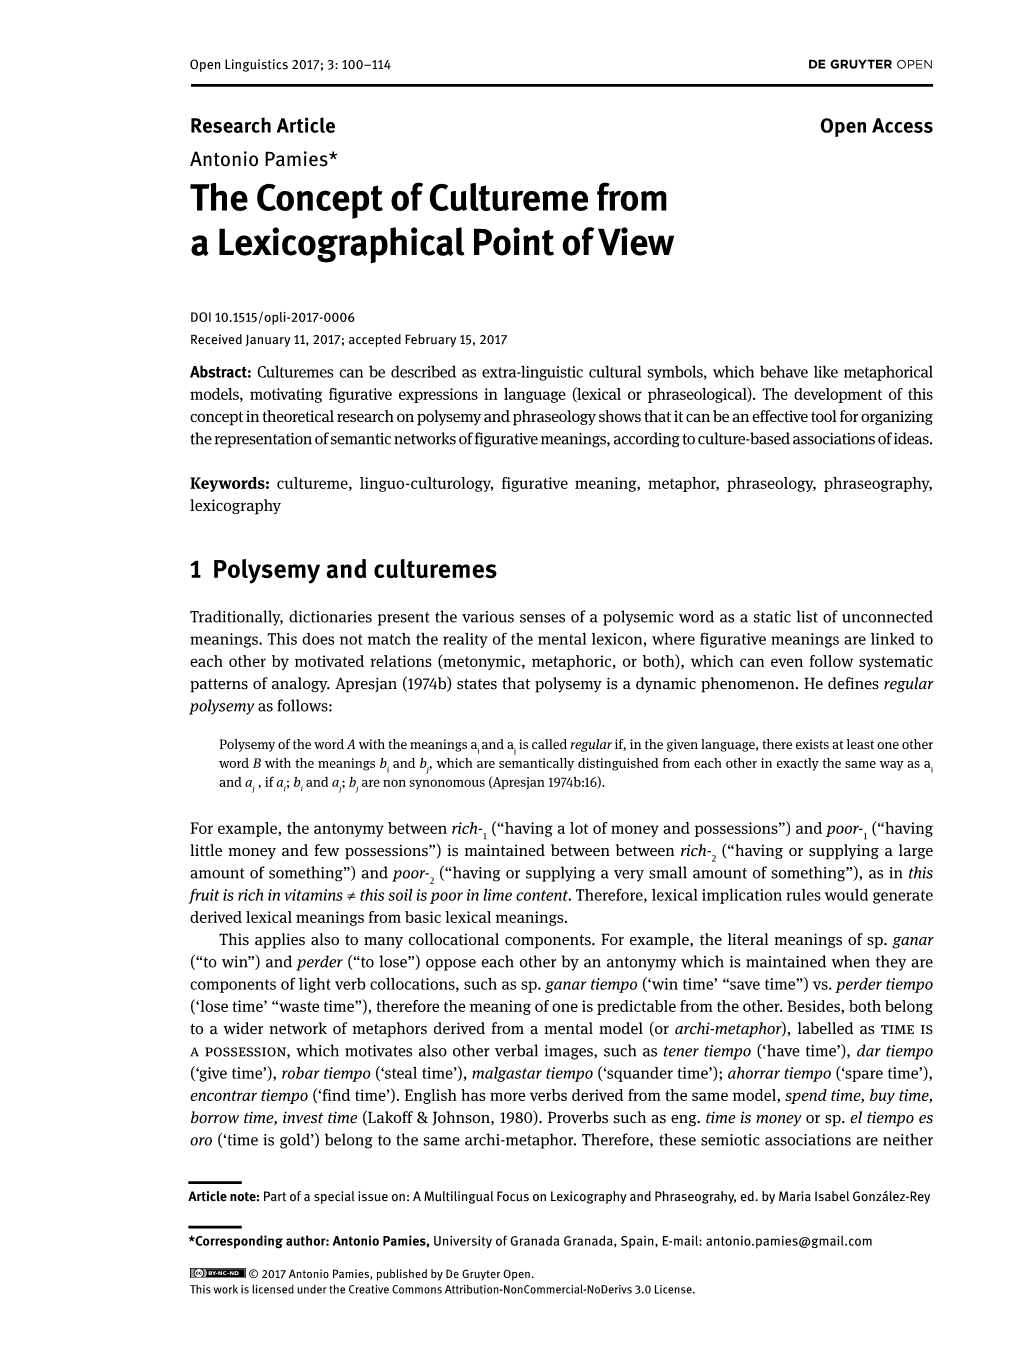 The Concept of Cultureme from a Lexicographical Point of View